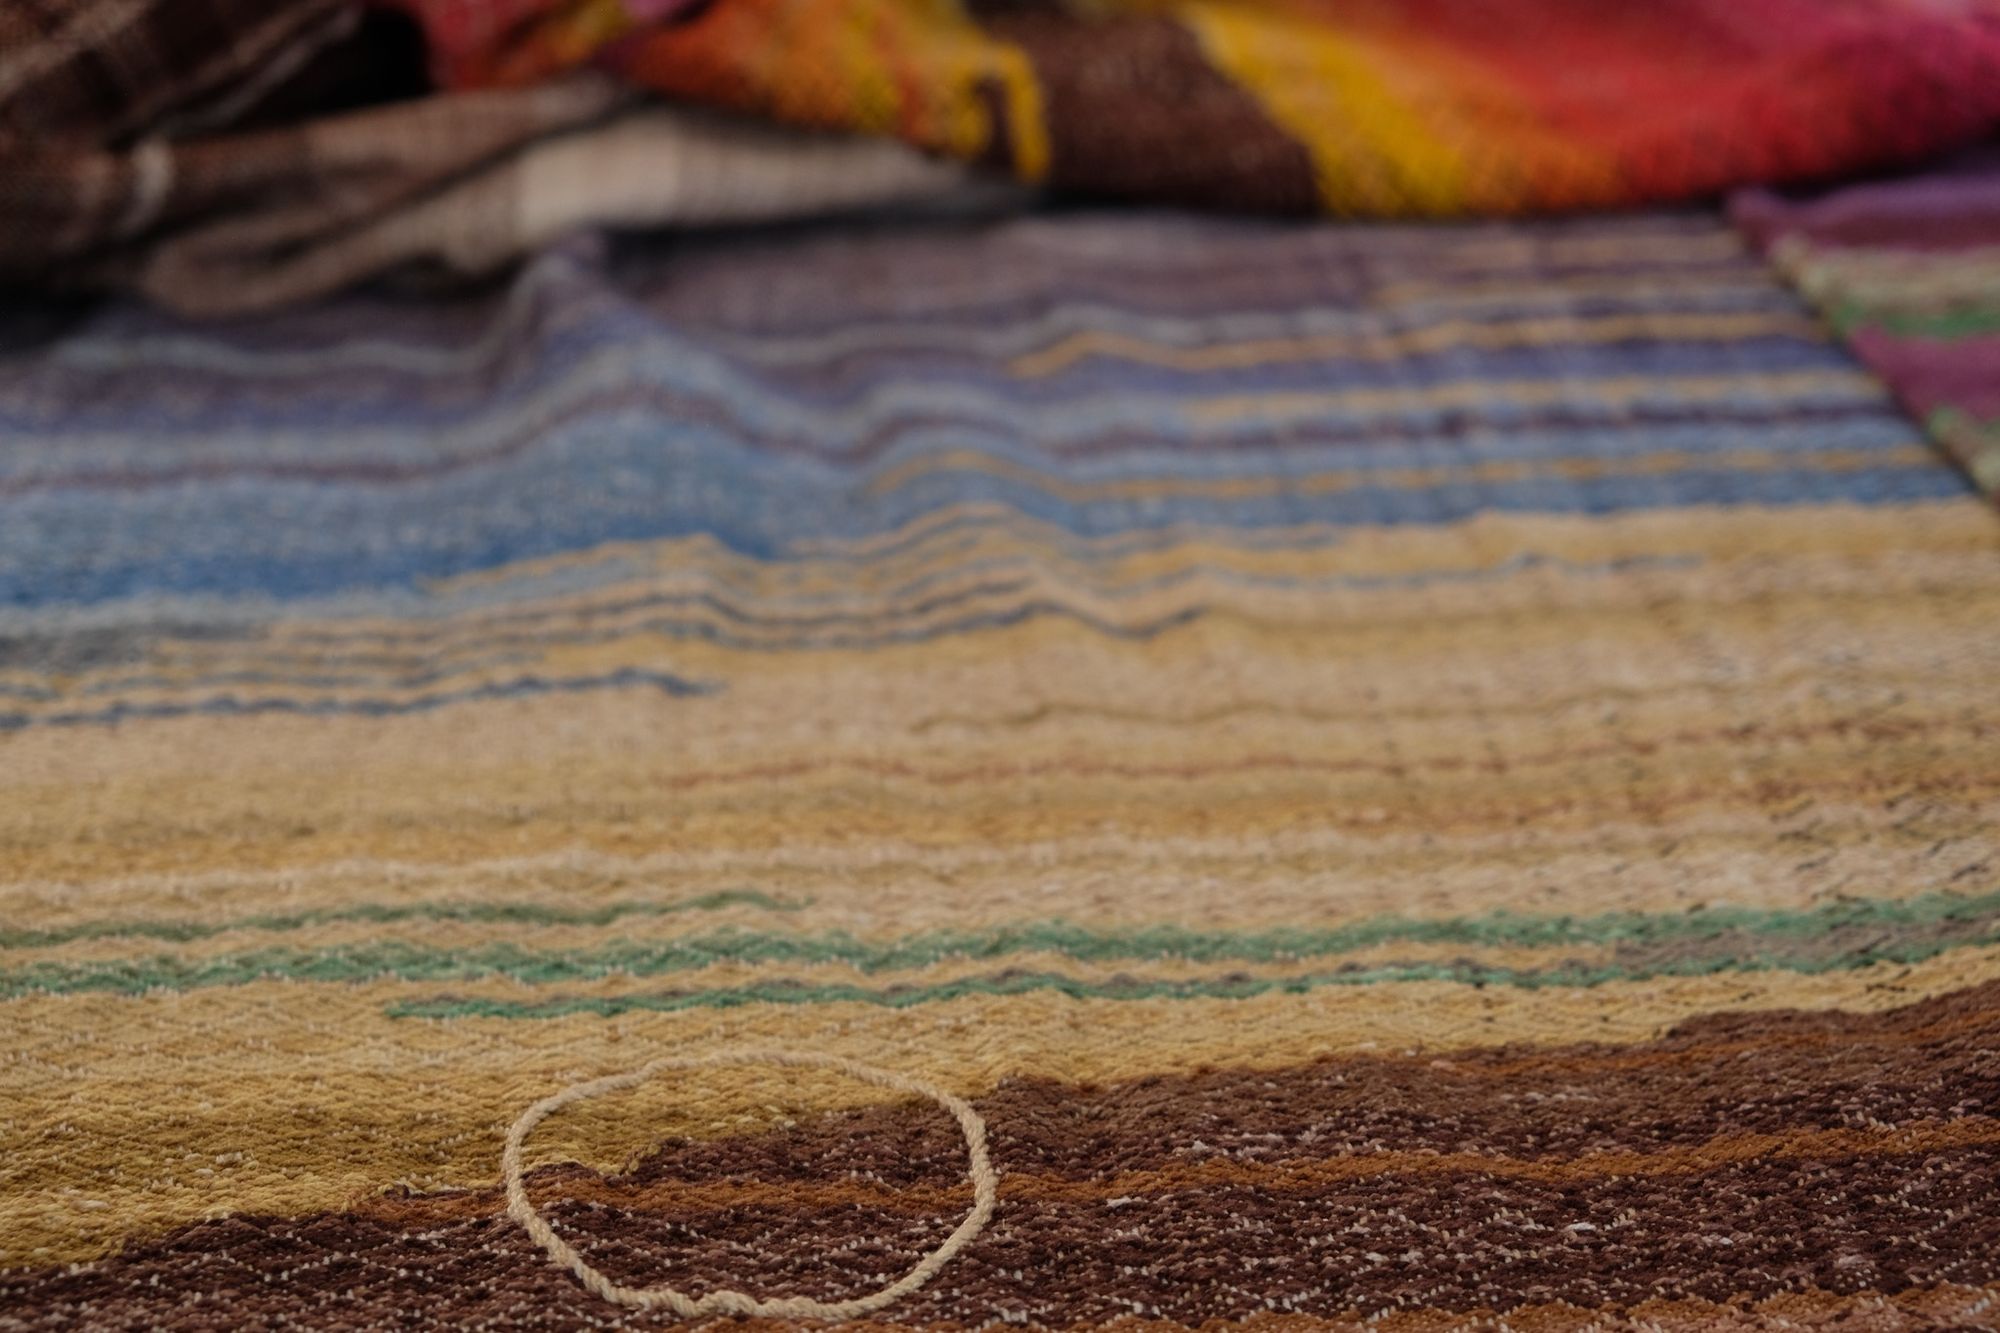 Handwoven, highly textures Diamond pattern fabric in every color of the rainbow, with natural browns and tans with a circle